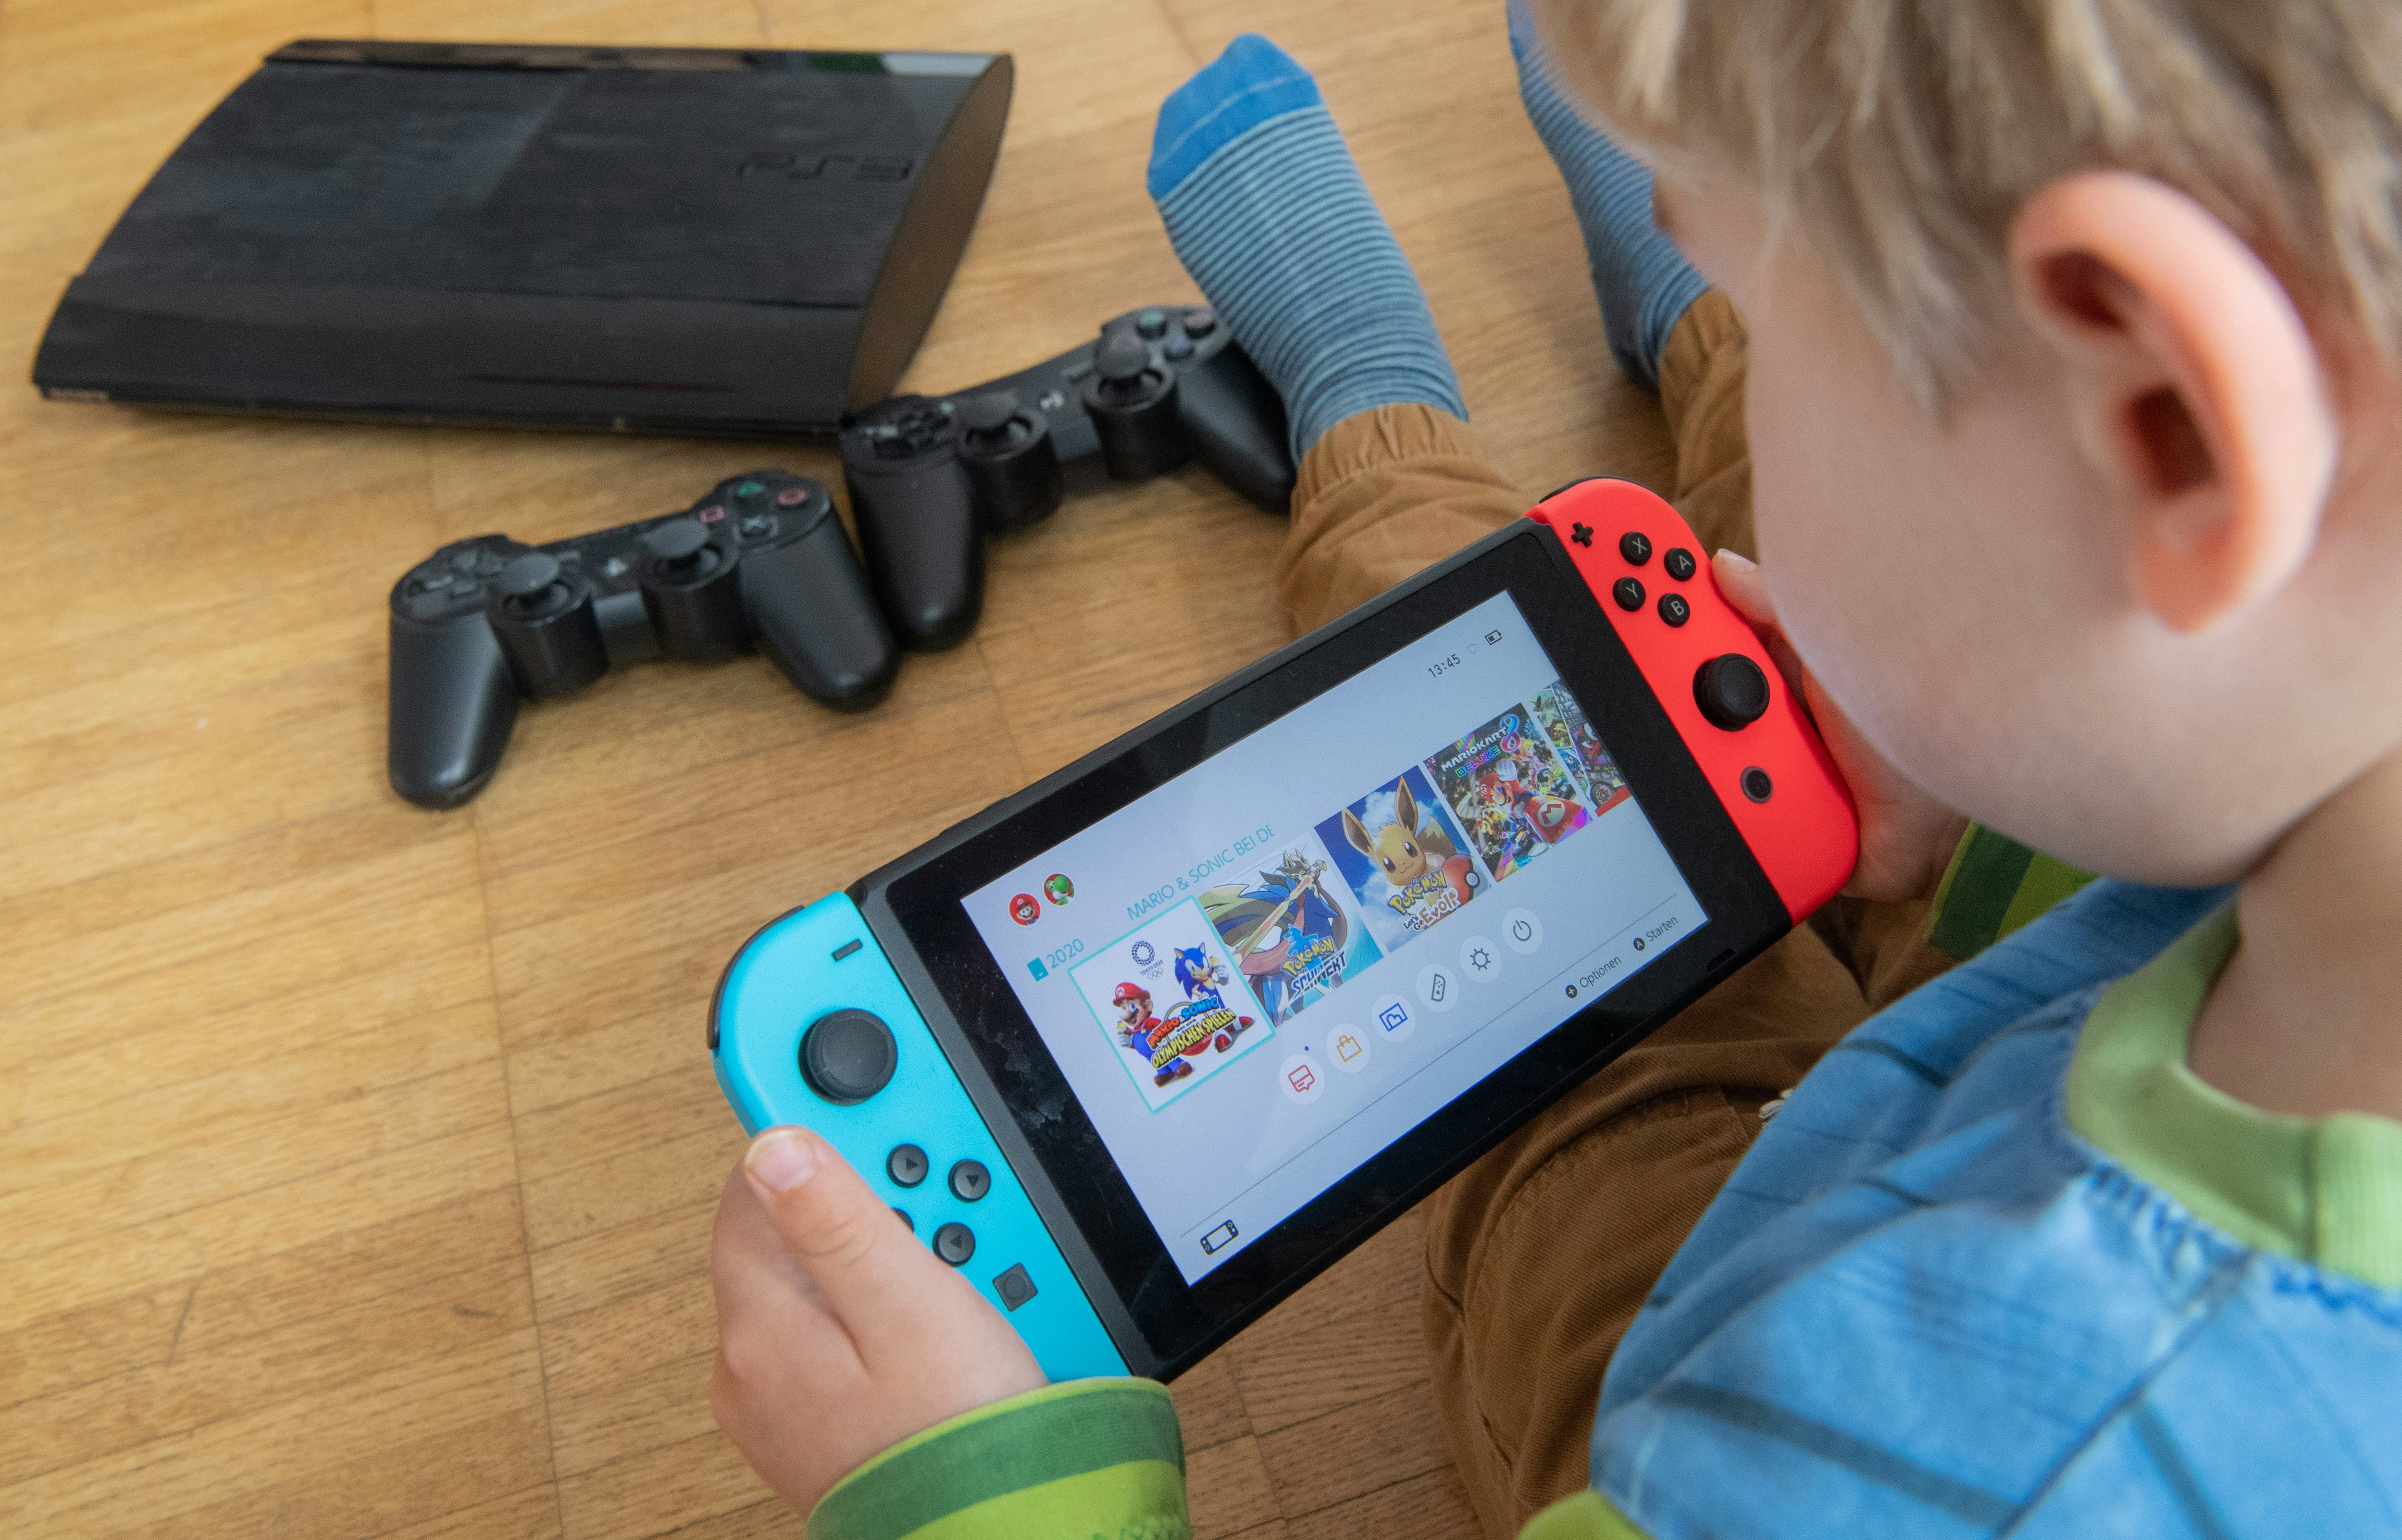 nintendo switch for under $200